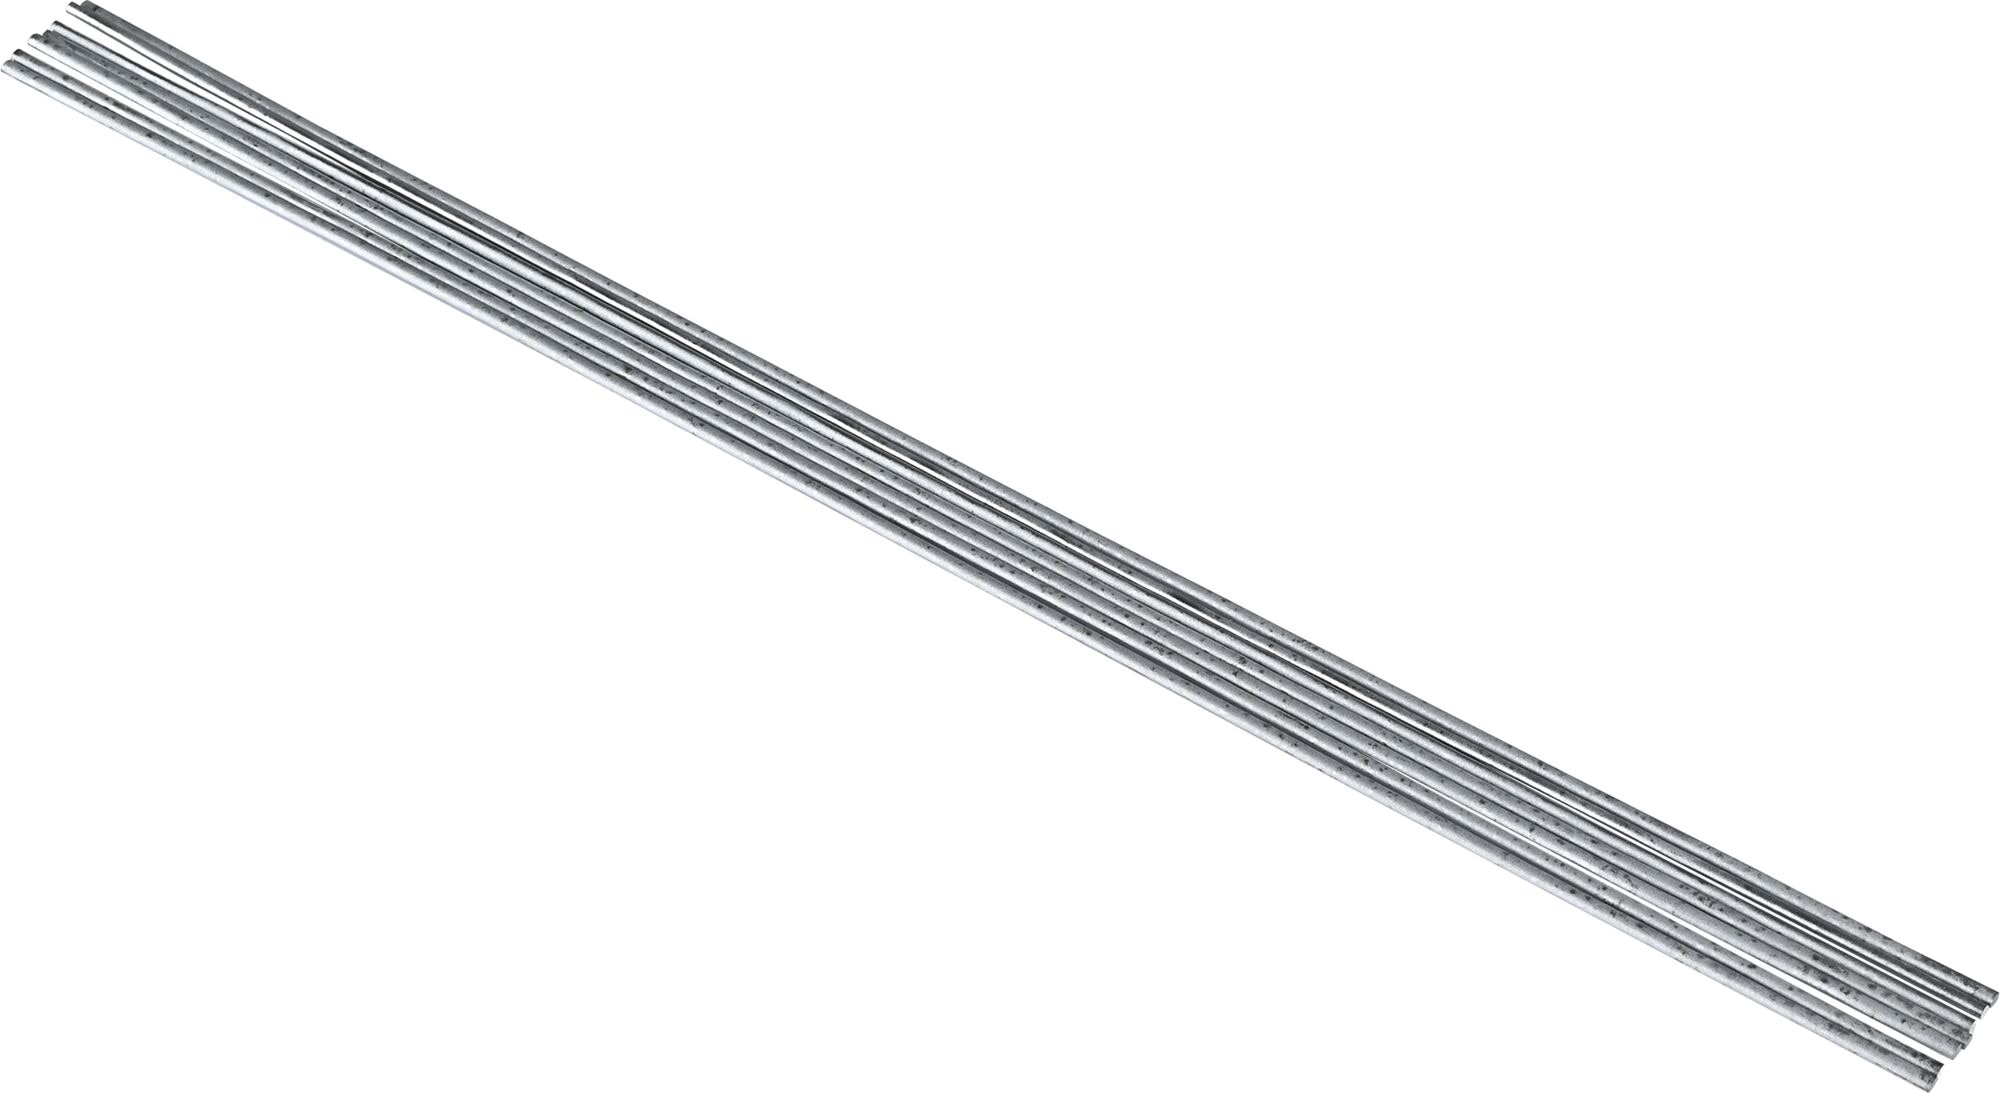 1/8-Inch by 18-Inch Brazing Rod Aluminum Quantity-7 